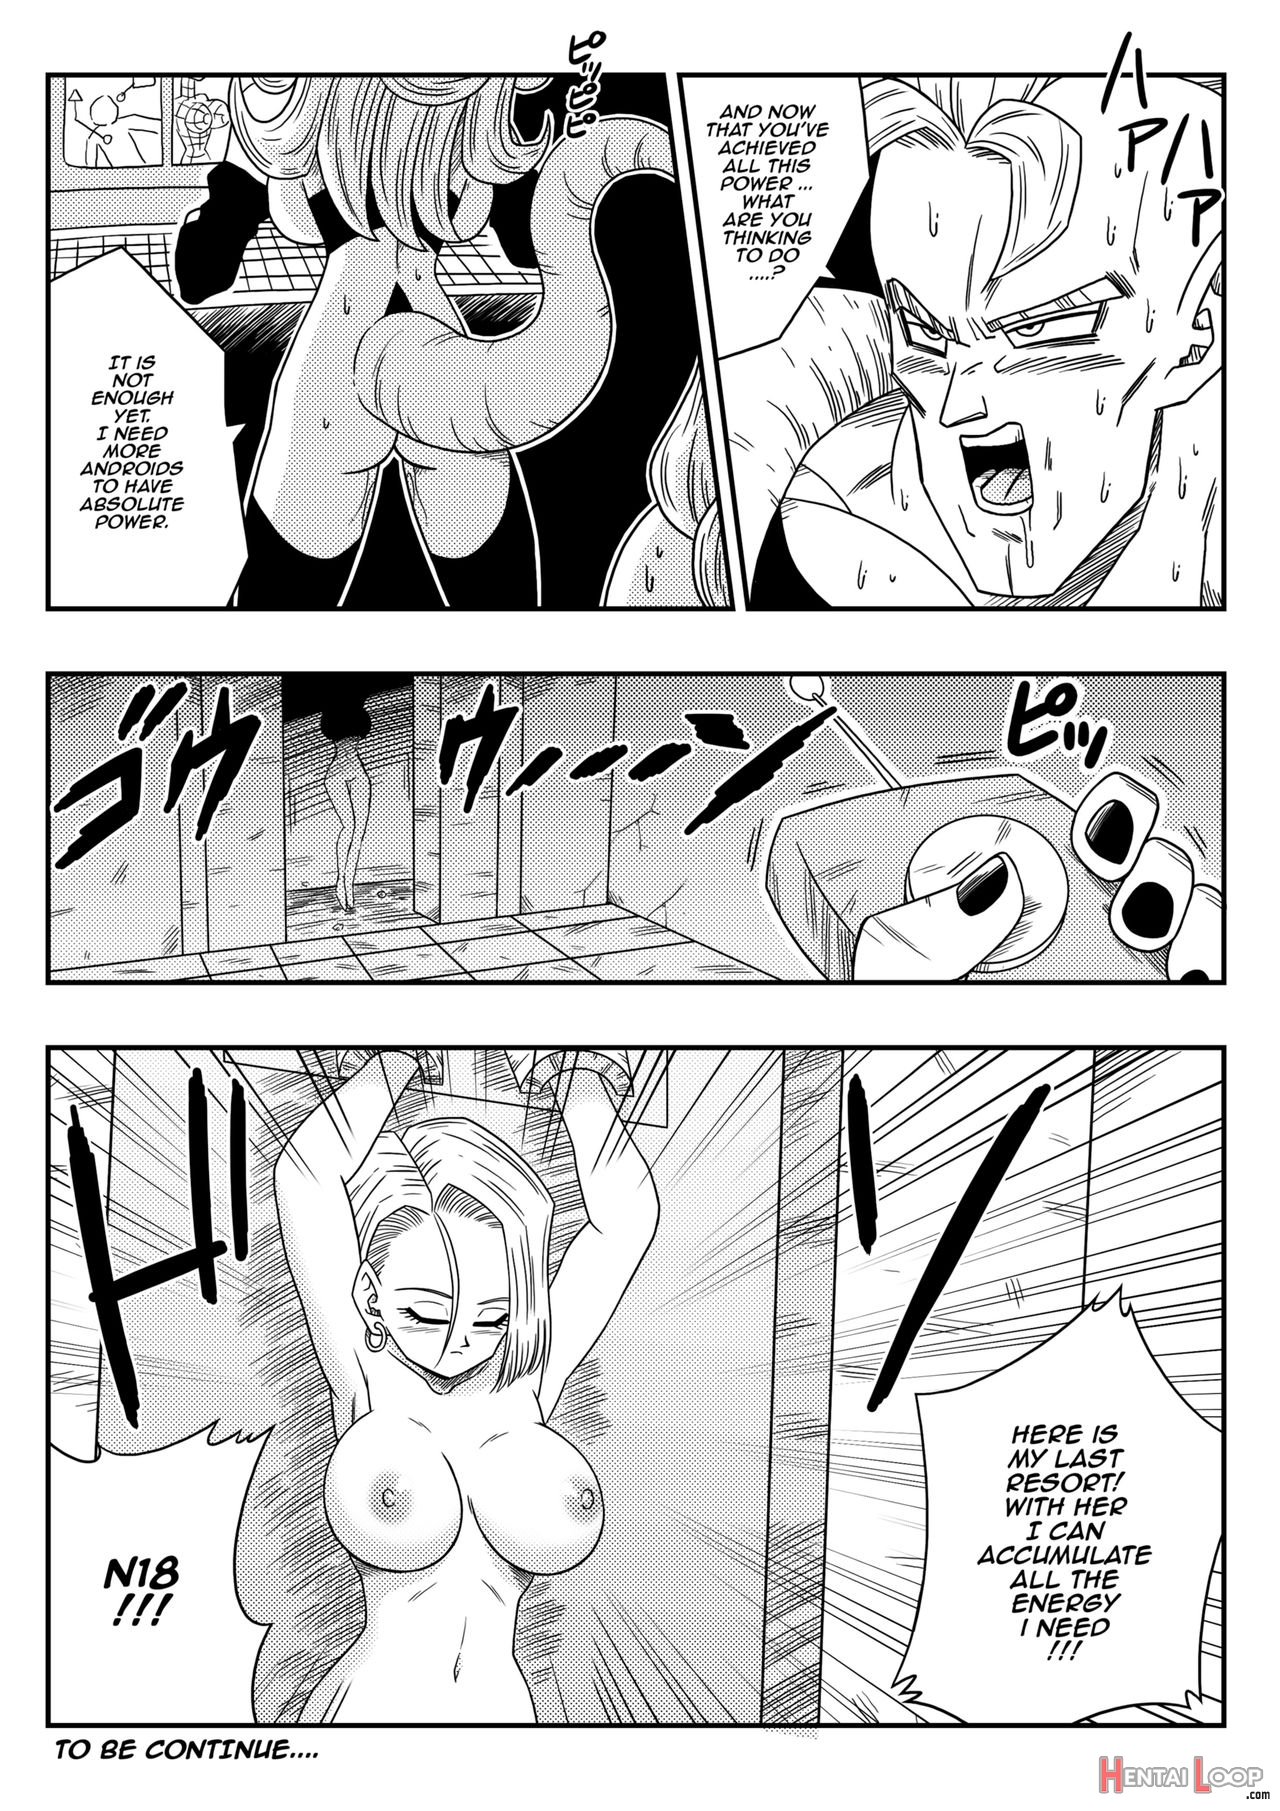 Busty Android Wants To Dominate The World!! page 16